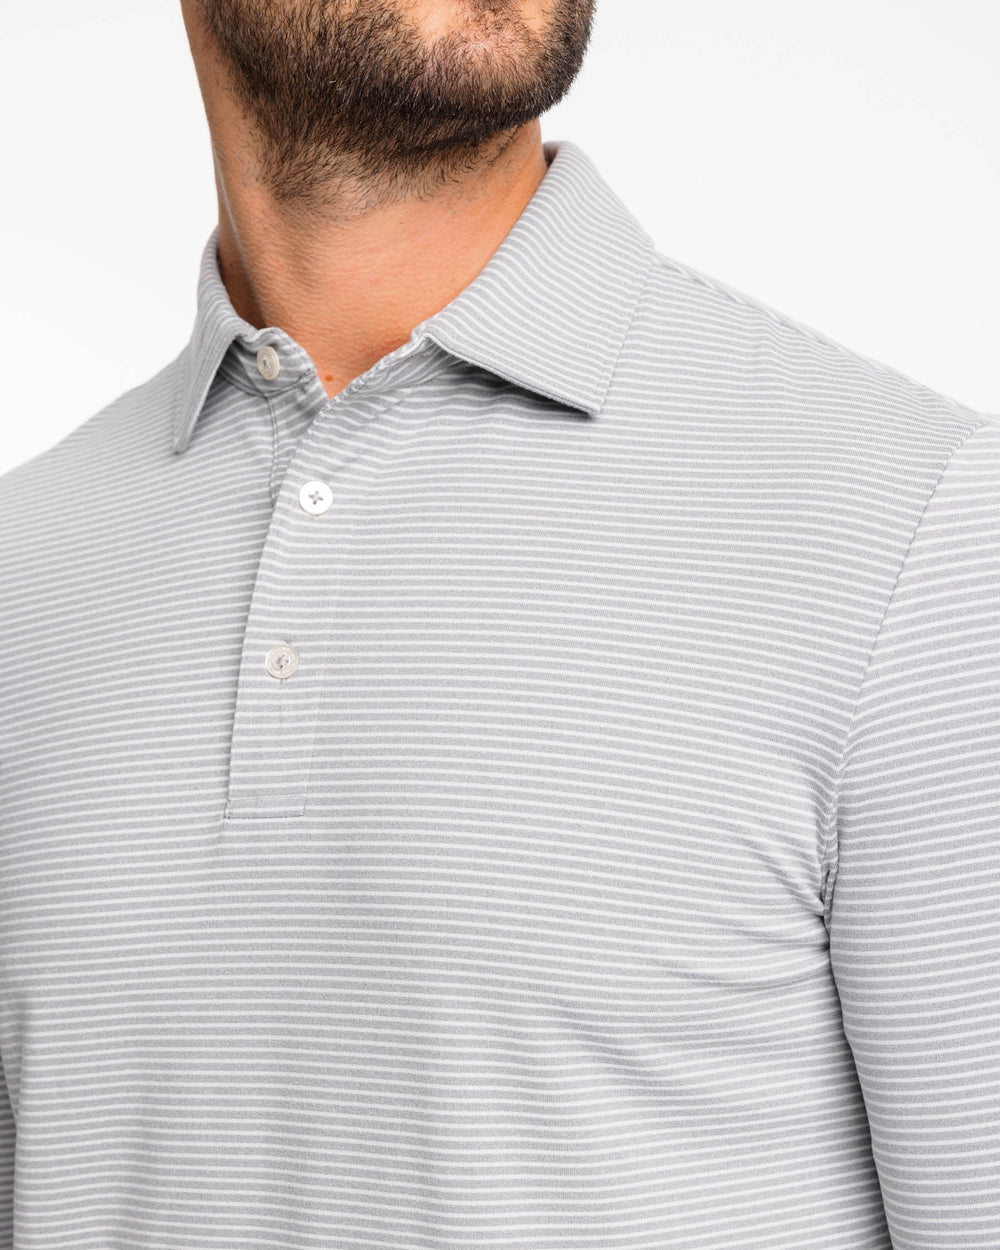 The detail view of the Ryder Heather Montefuma Performance Long Sleeve Polo Shirt by Southern Tide - Heather Steel Grey